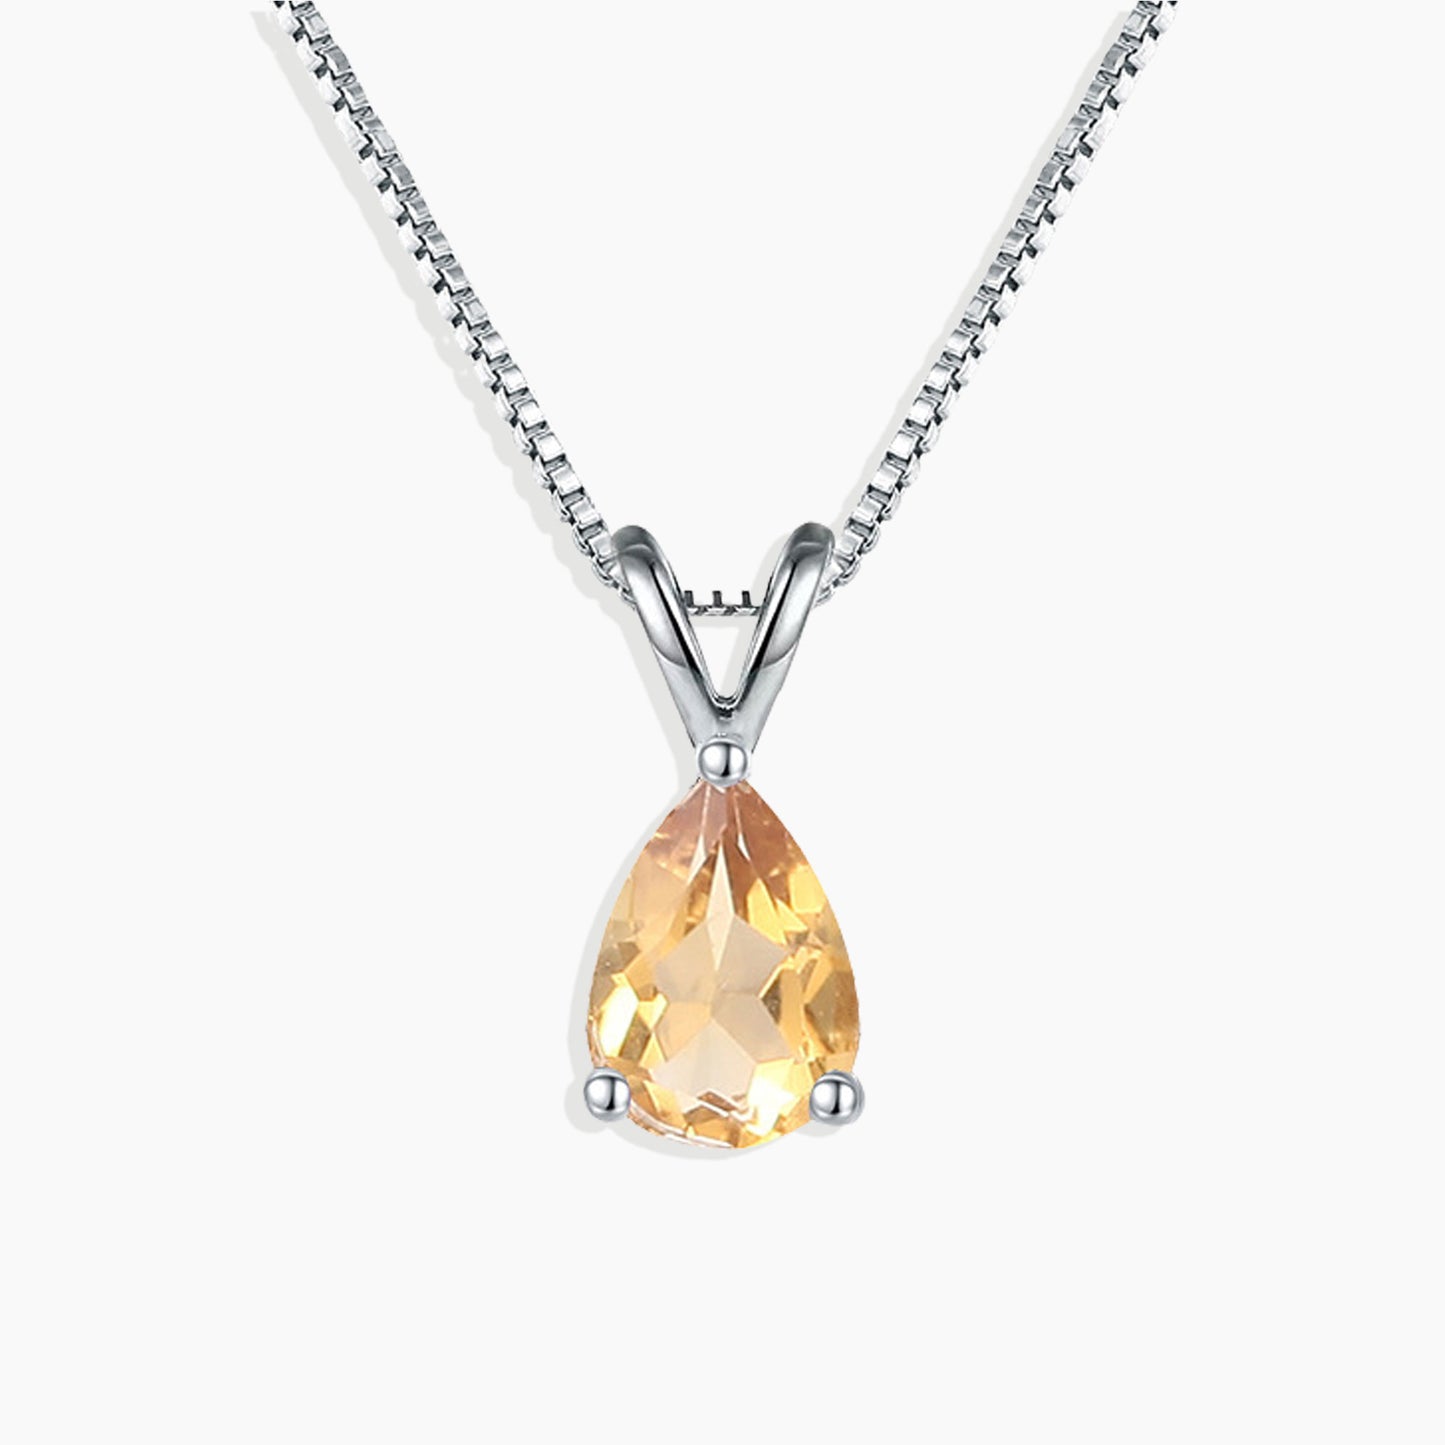 Irosk Pear Cut Necklace in Sterling Silver -  Citrine